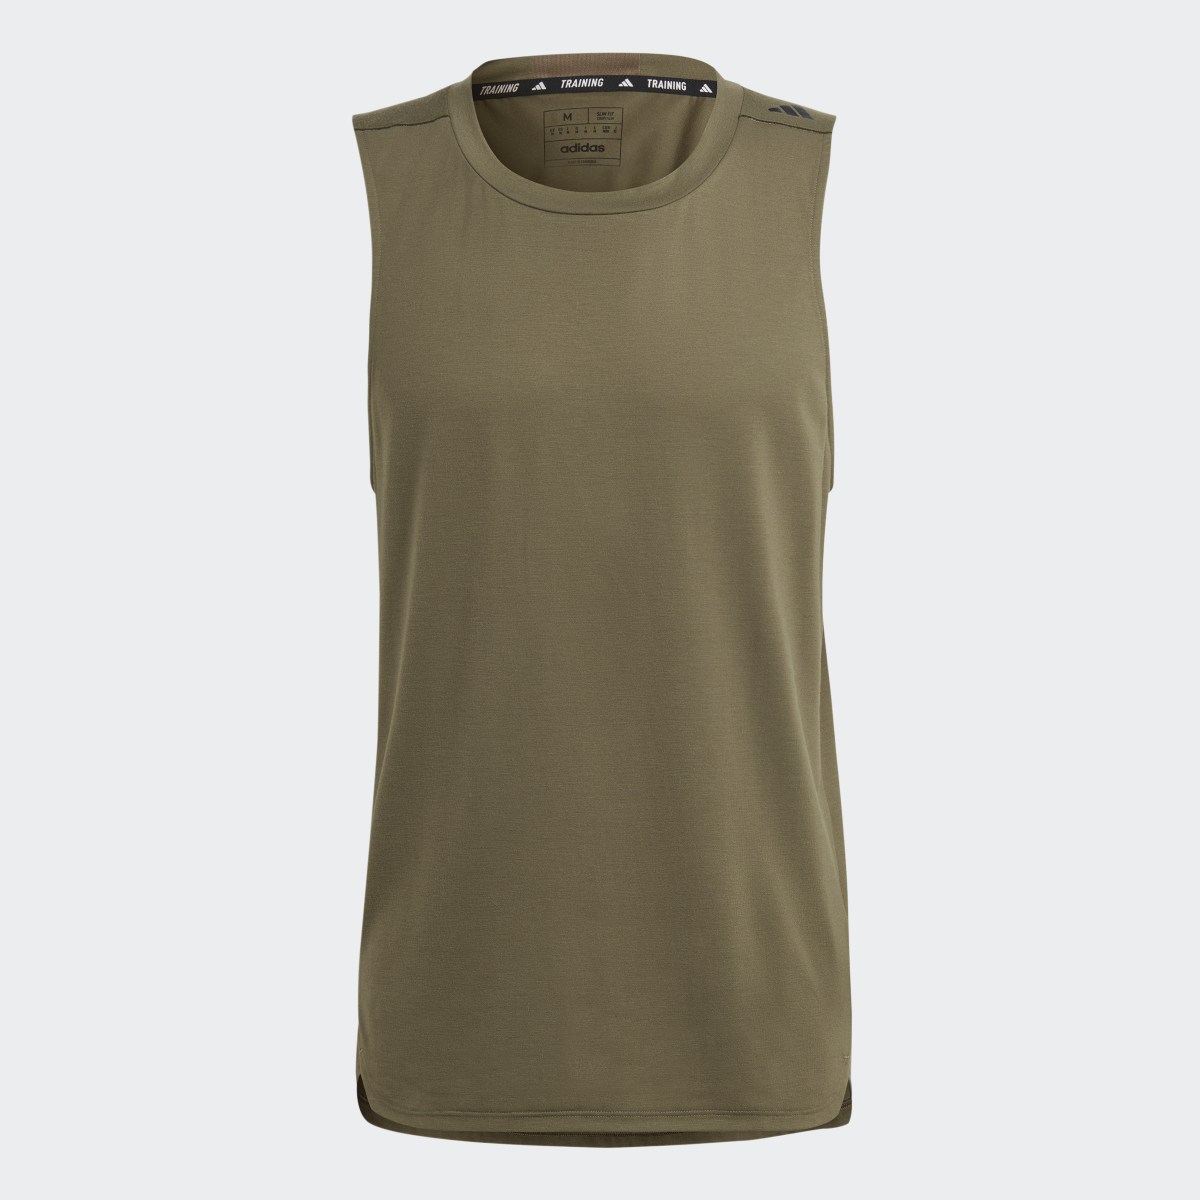 Adidas Designed for Training Workout Tank Top. 5